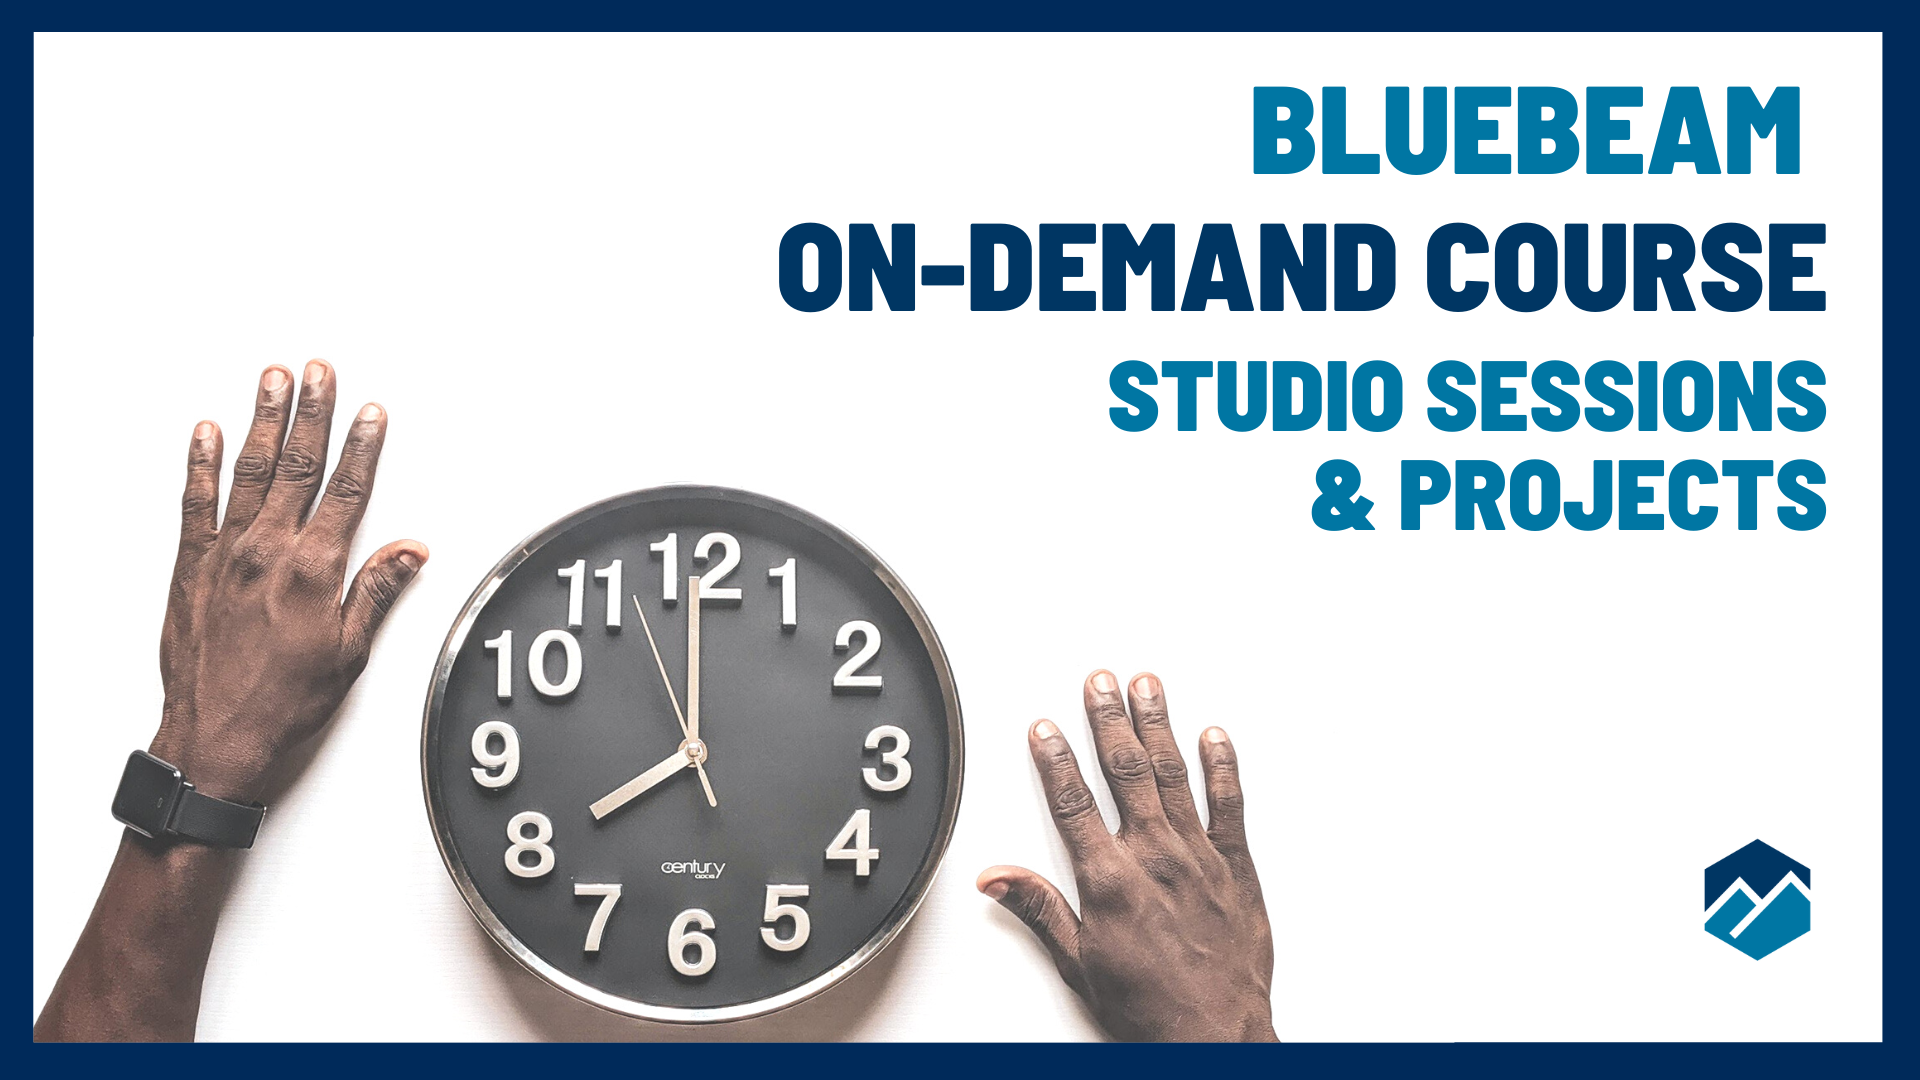 On Demand Course - Bluebeam Studio Sessions & Projects - UChapter2